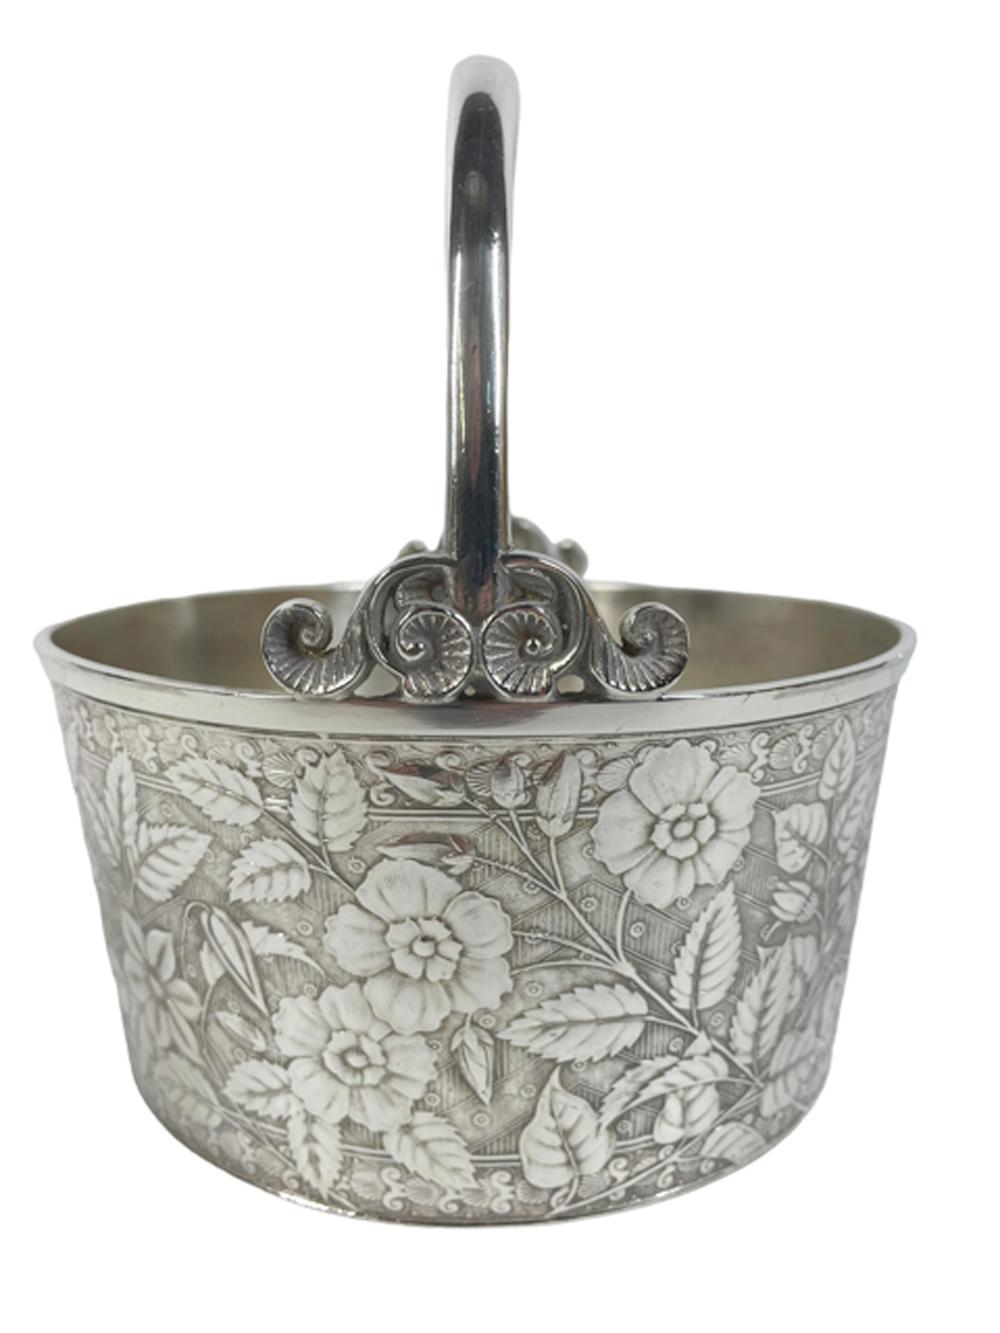 American Aesthetic Movement Silver Plate Ice Bucket by Meridan Silver w/Chrysanthemums